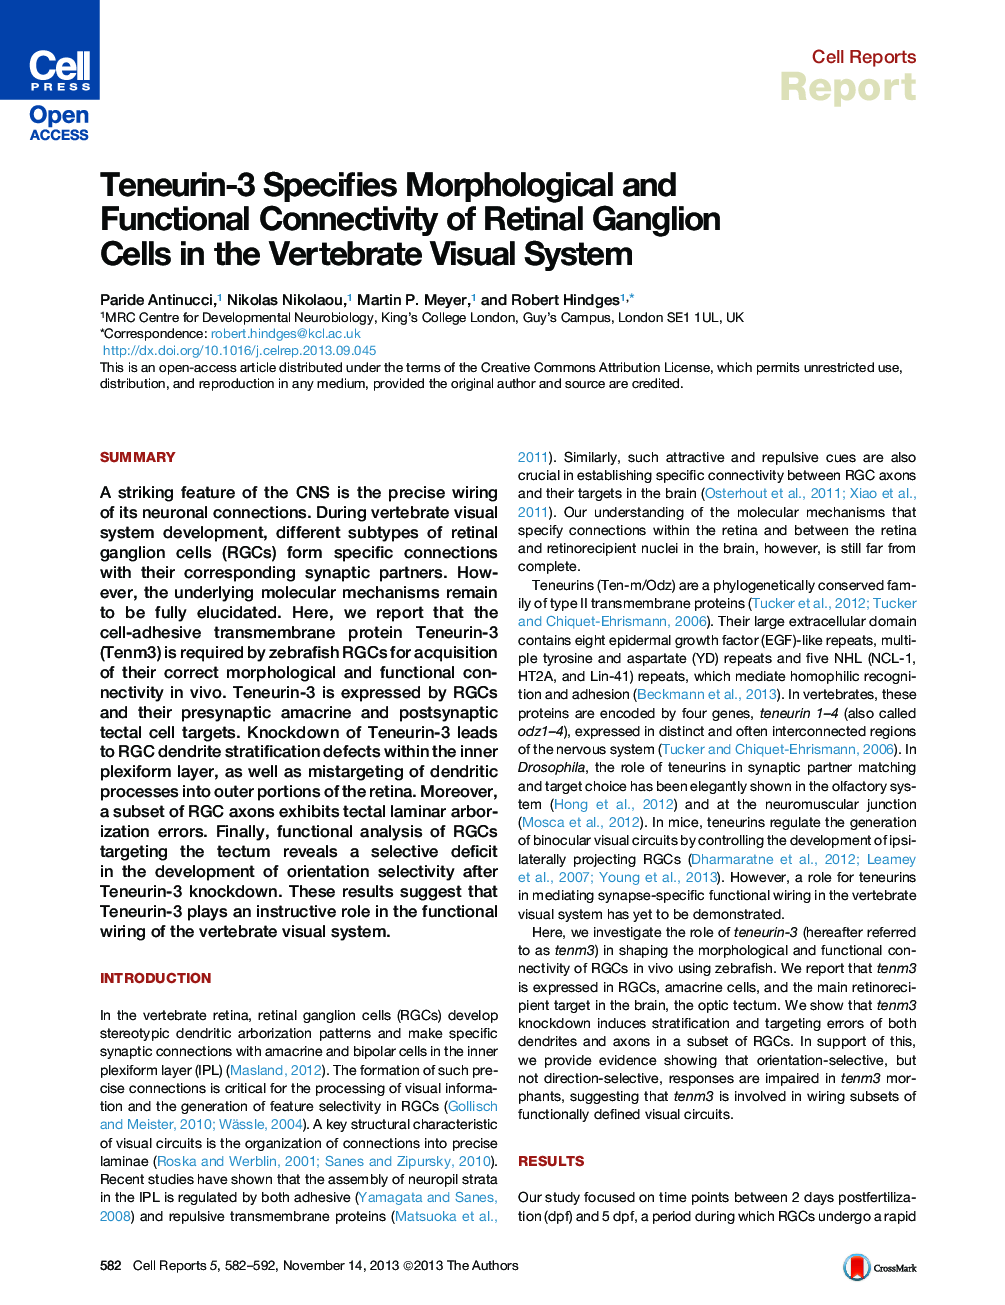 Teneurin-3 Specifies Morphological and Functional Connectivity of Retinal Ganglion Cells in the Vertebrate Visual System 